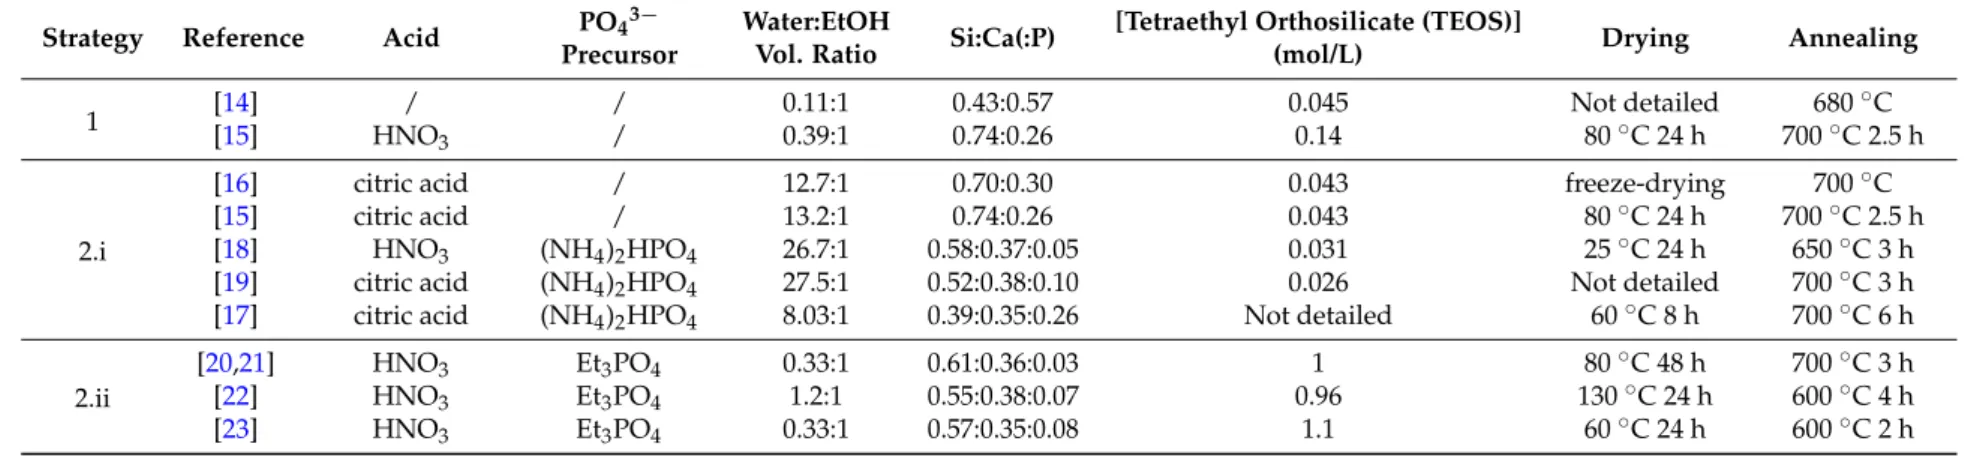 Table 1. Comparison of experimental conditions for different sol-gel syntheses protocols.